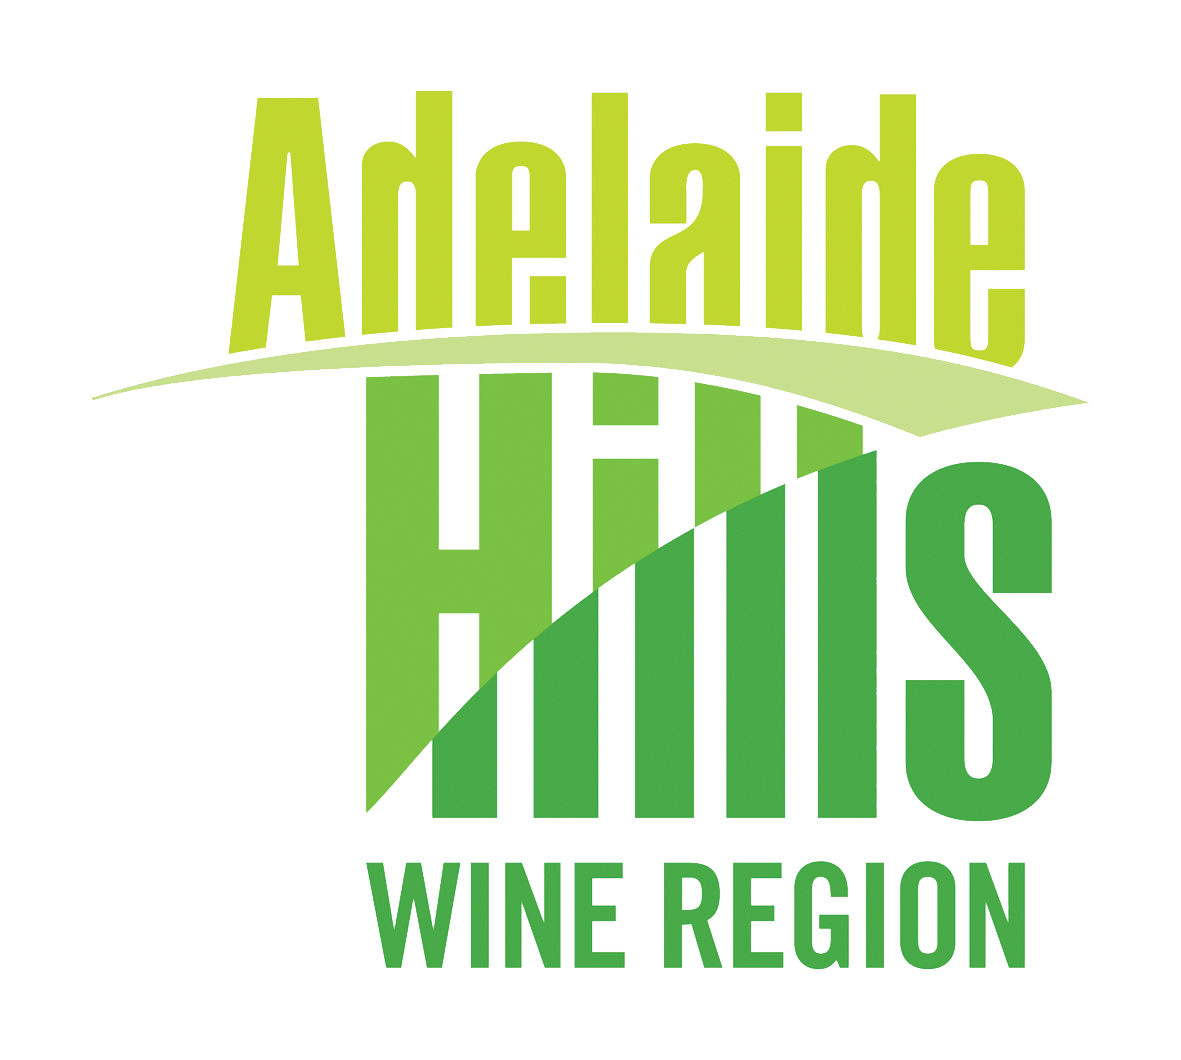 File:Adelaide Hills Council.s